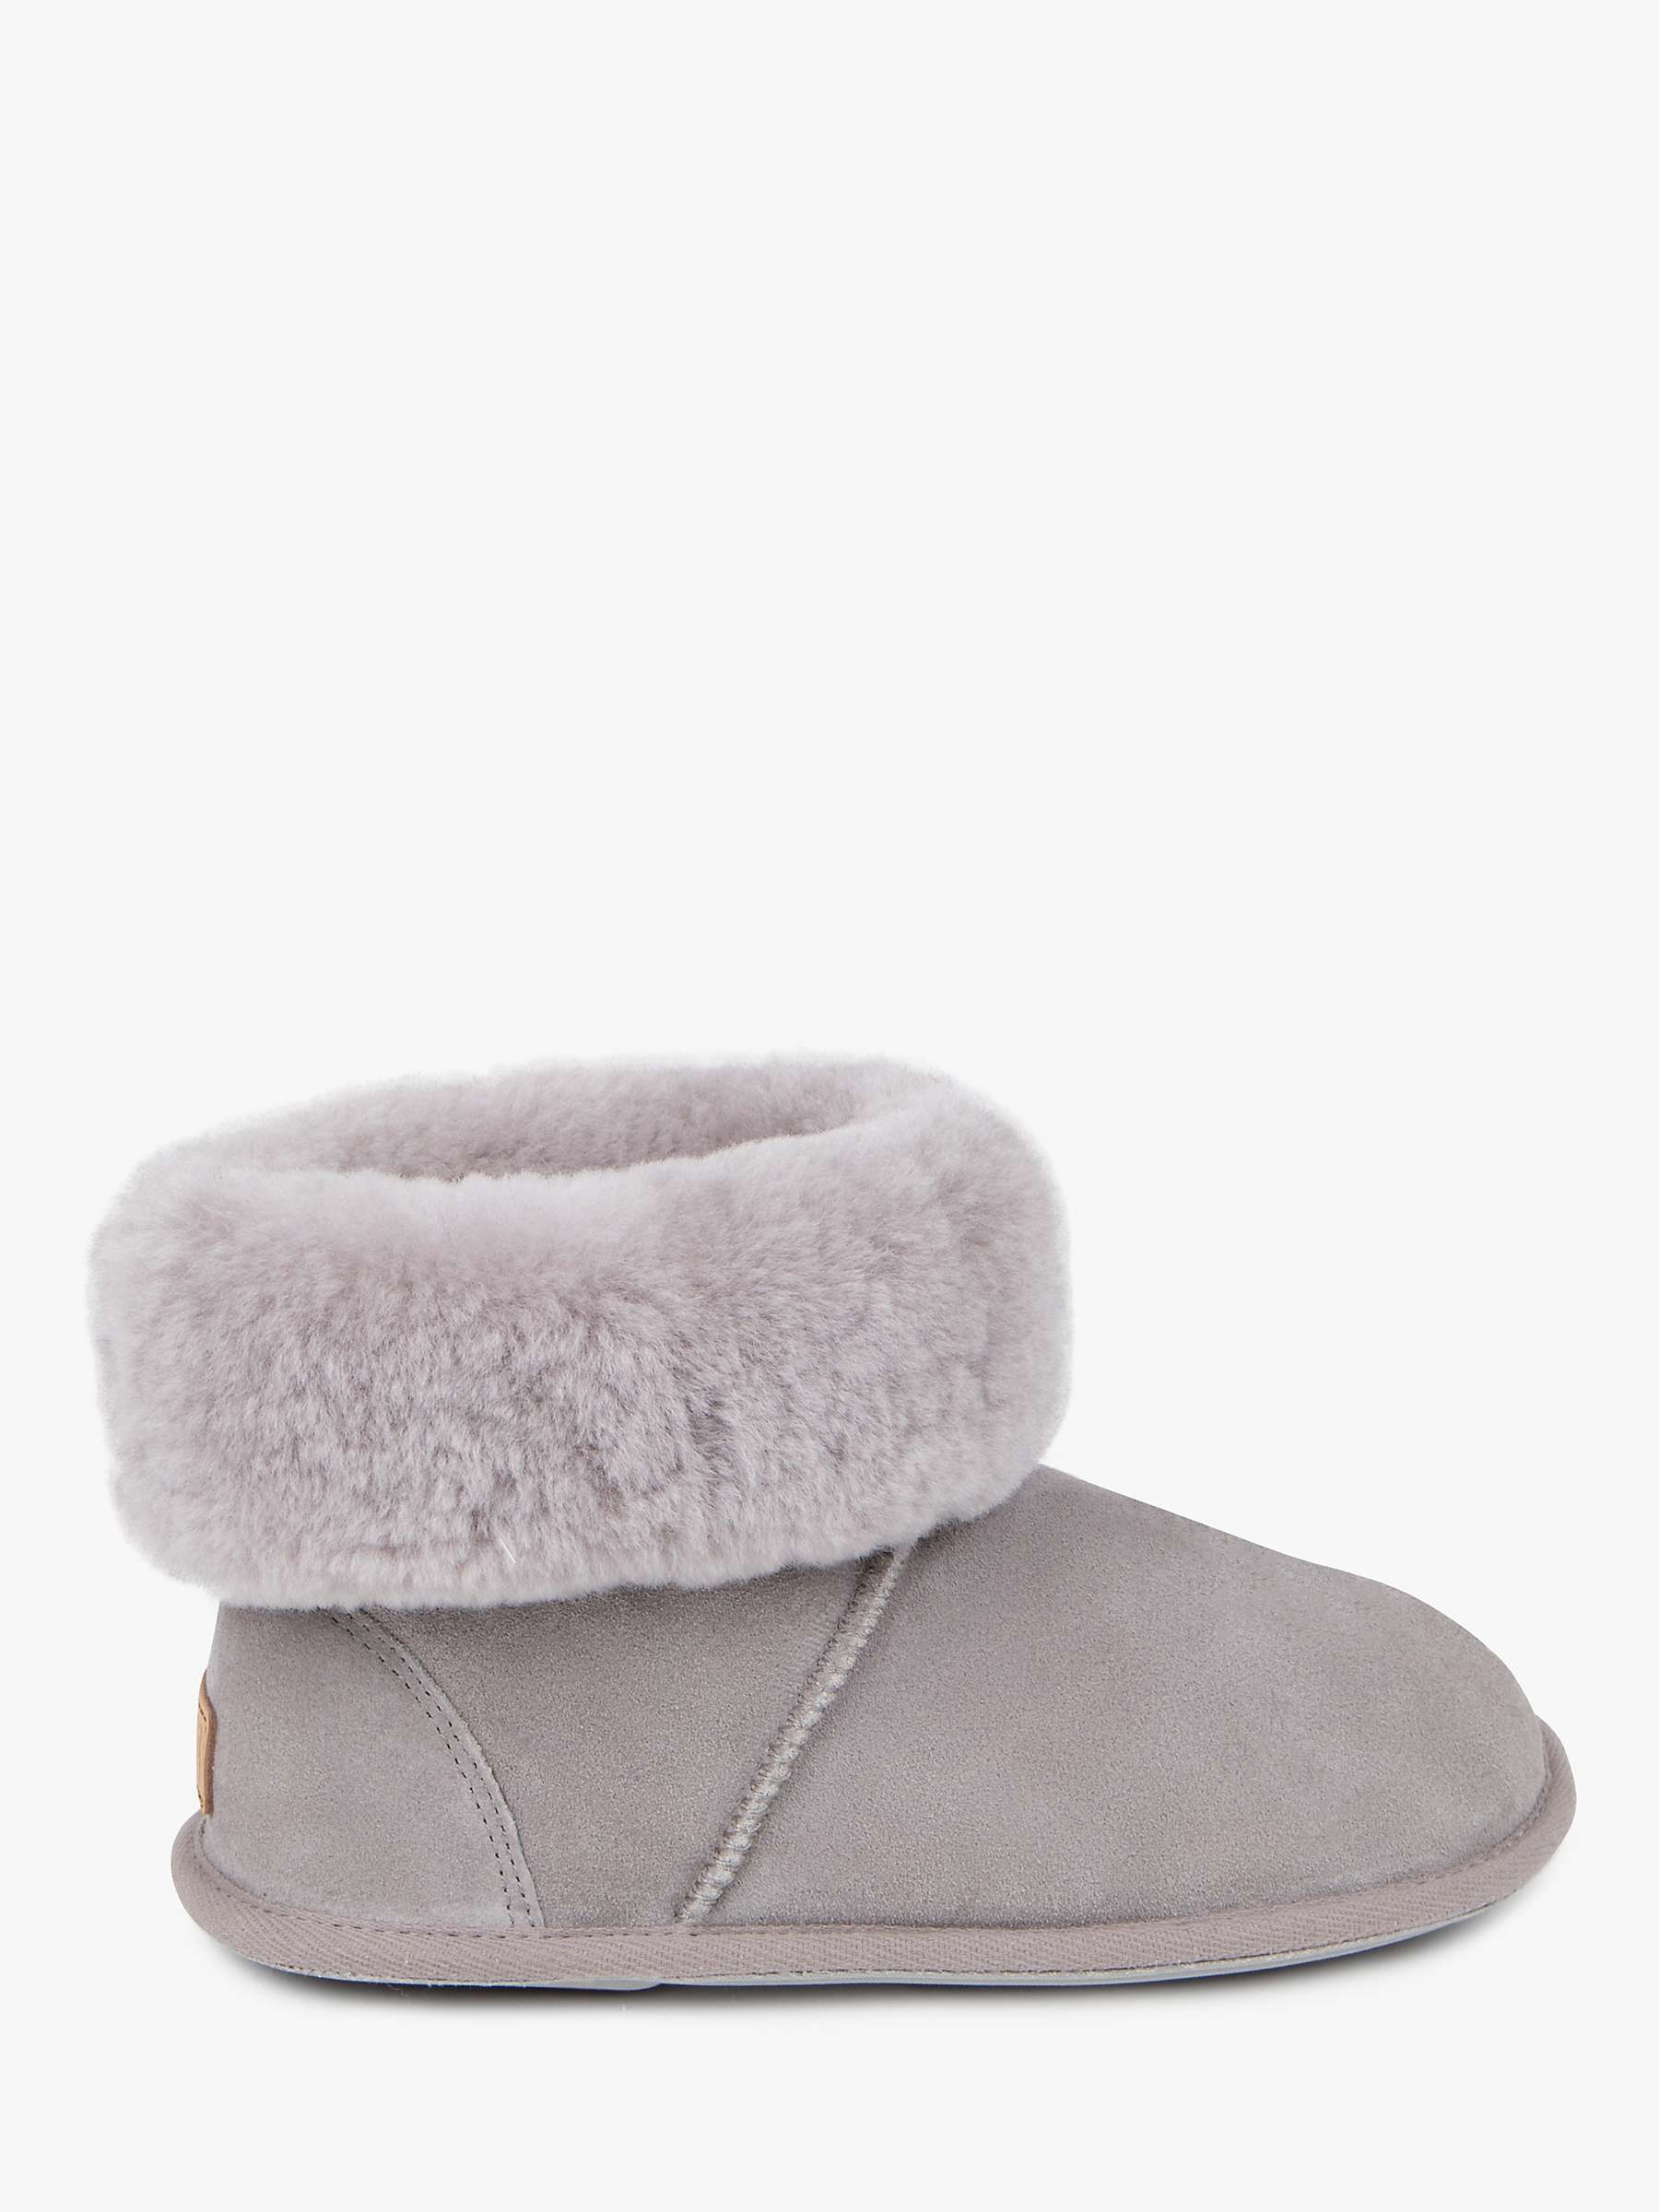 Buy Just Sheepskin Albery Suede Slipper Boots Online at johnlewis.com